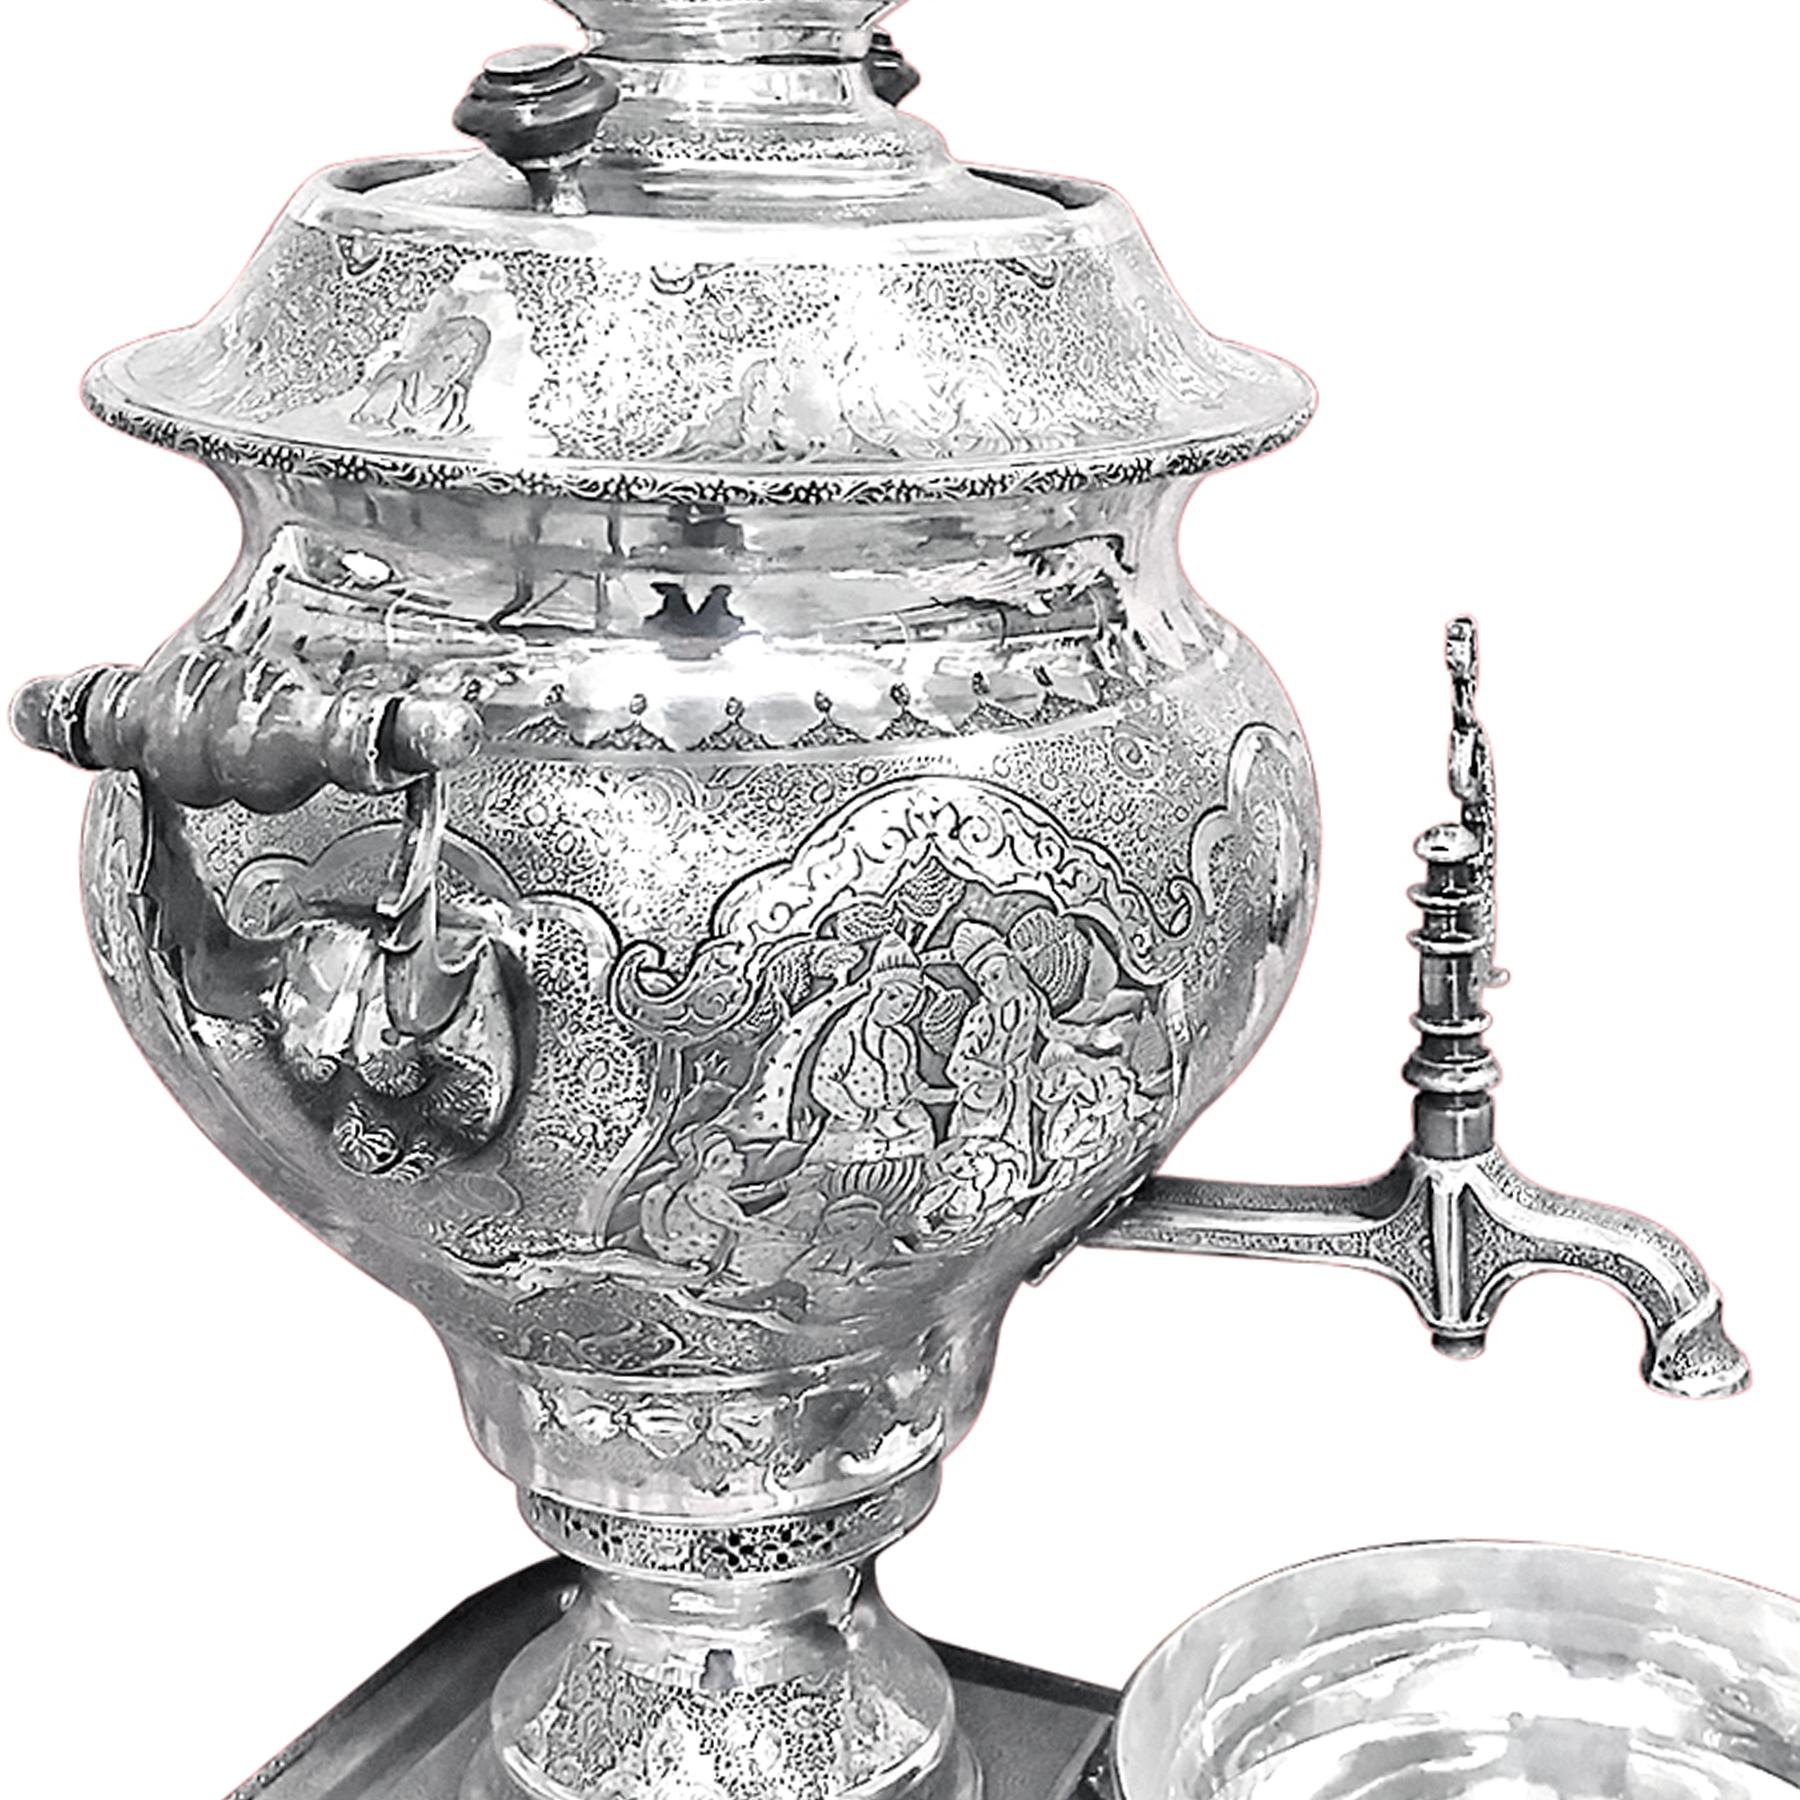 This unique and vintage piece of Samovar set was hand carved delicately. Each part has a different kind of design depicting men, women, birds, animals, trees, and houses that tells an inspiring story. Made by the best craftsman,